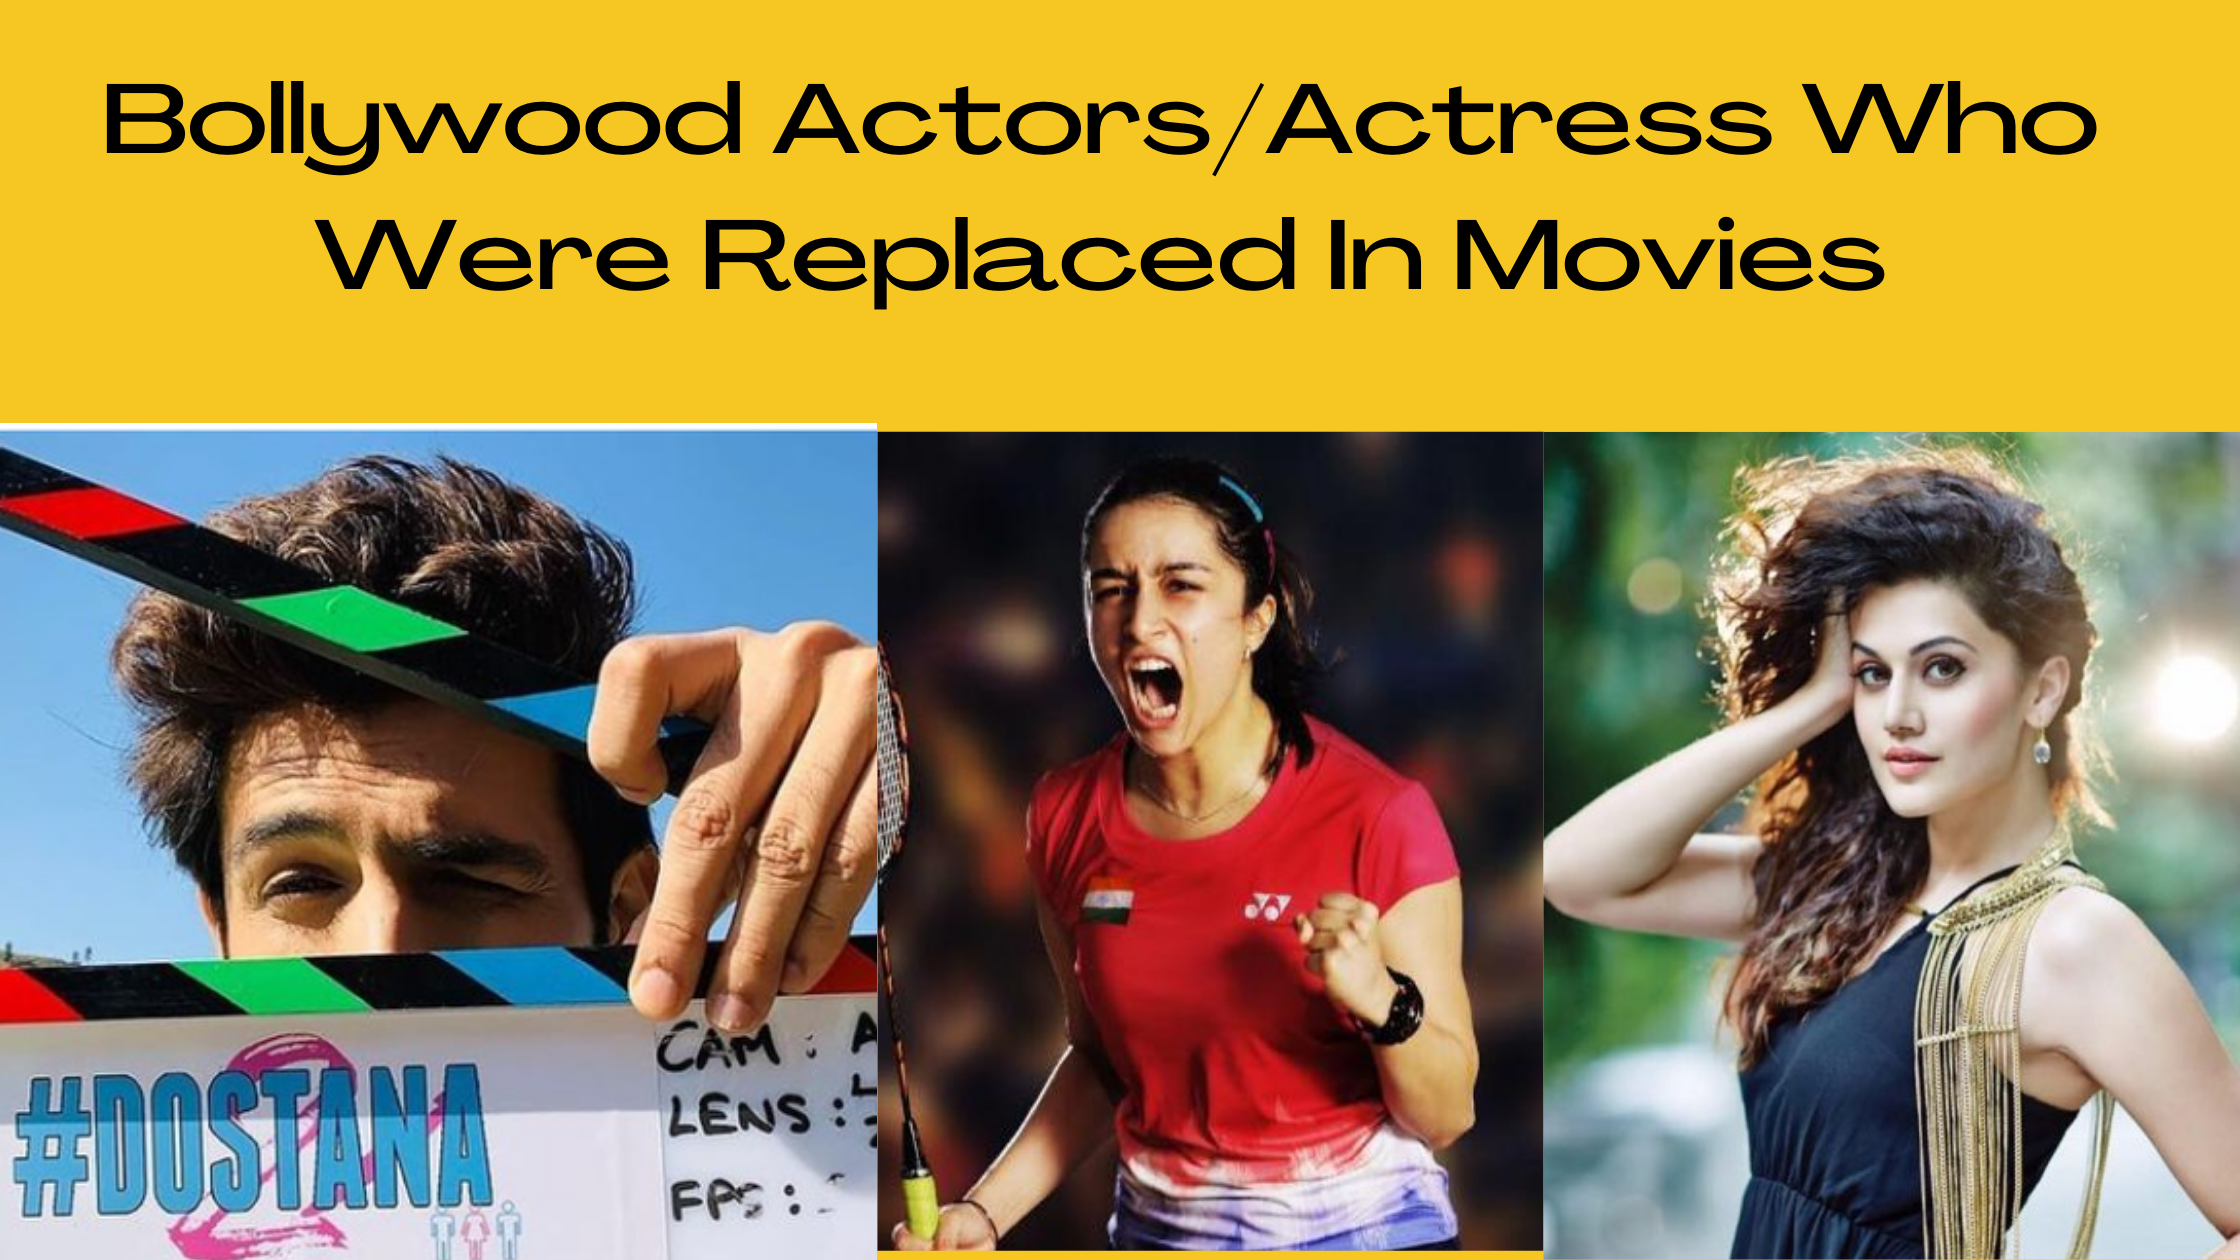 Bollywood Actors/Actress Who Were Replaced In Movies